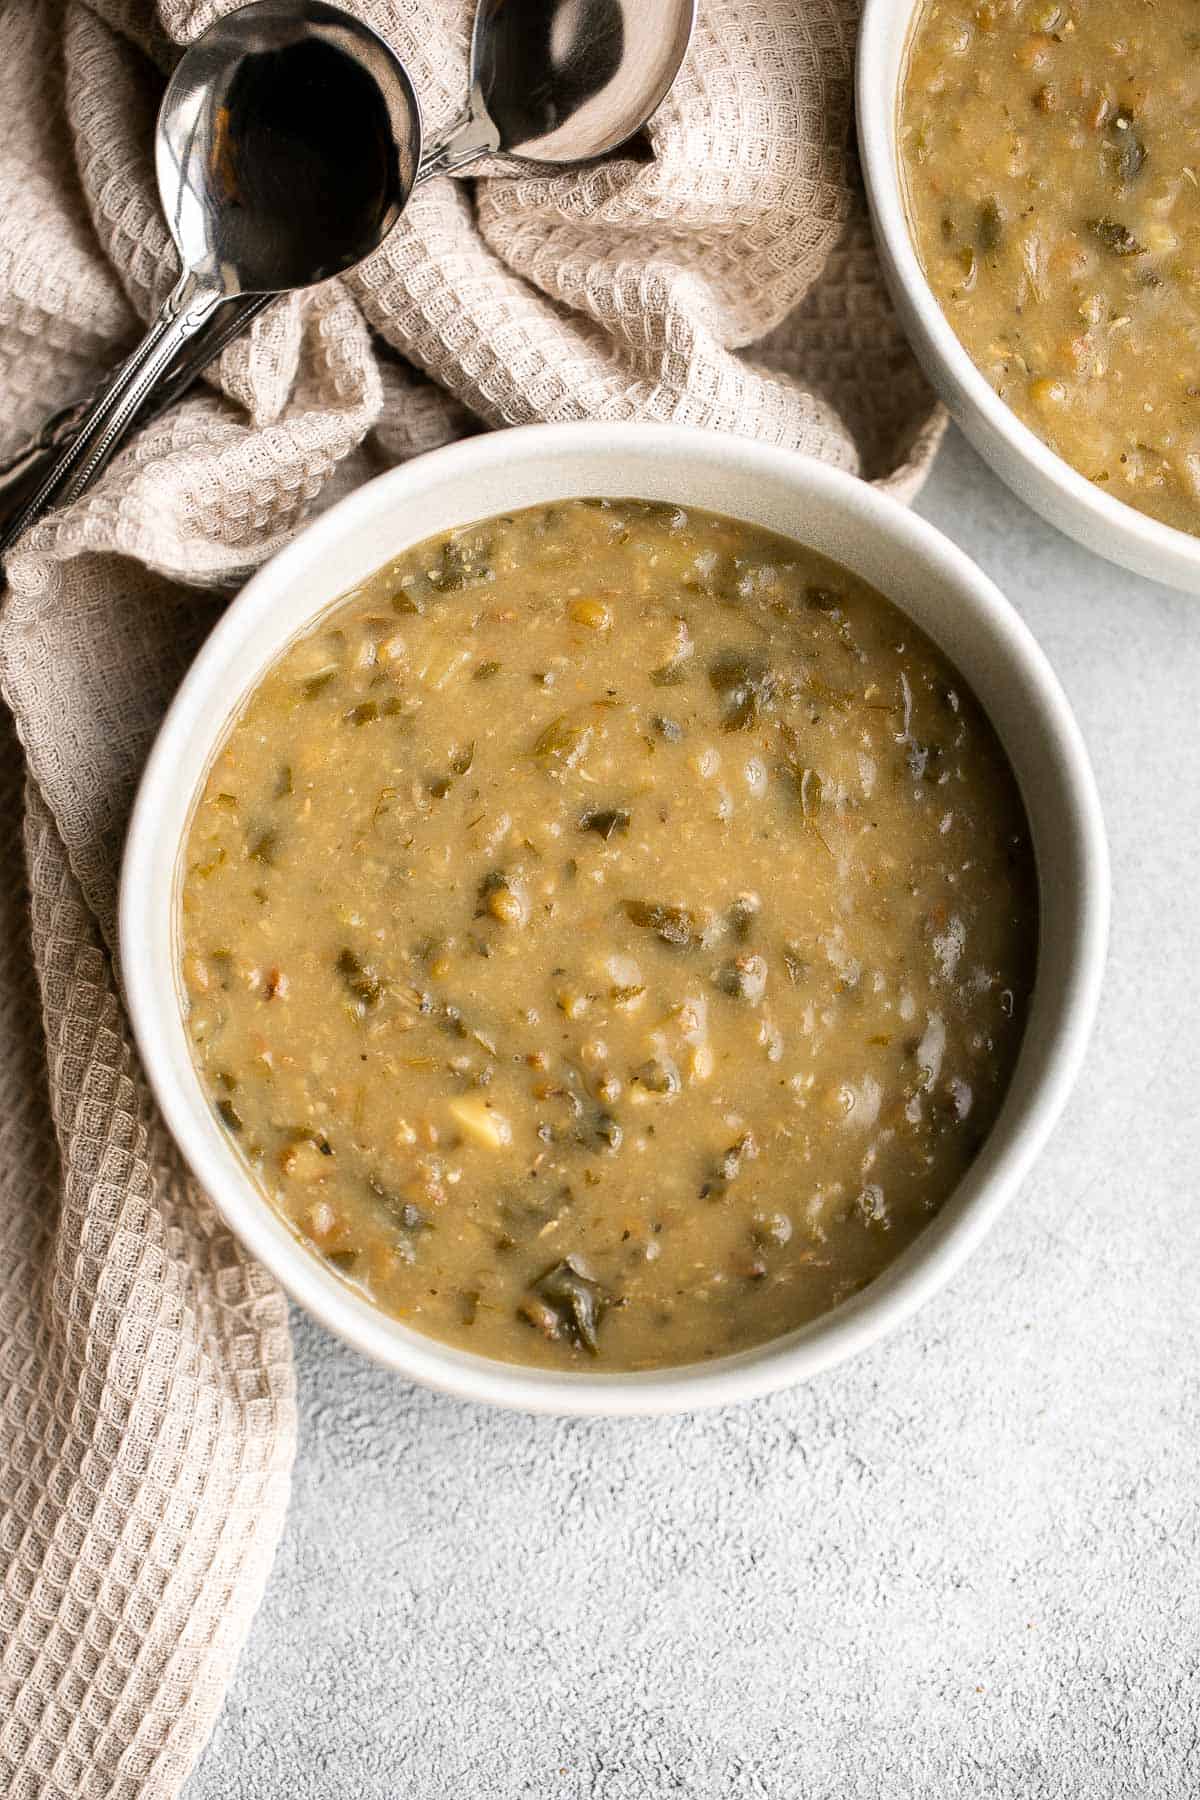 This Persian Lentil Soup is a quick and easy vegan soup that is flavorful, delicious, and healthy. Make this thick and hearty meal in just 45 minutes! | aheadofthyme.com